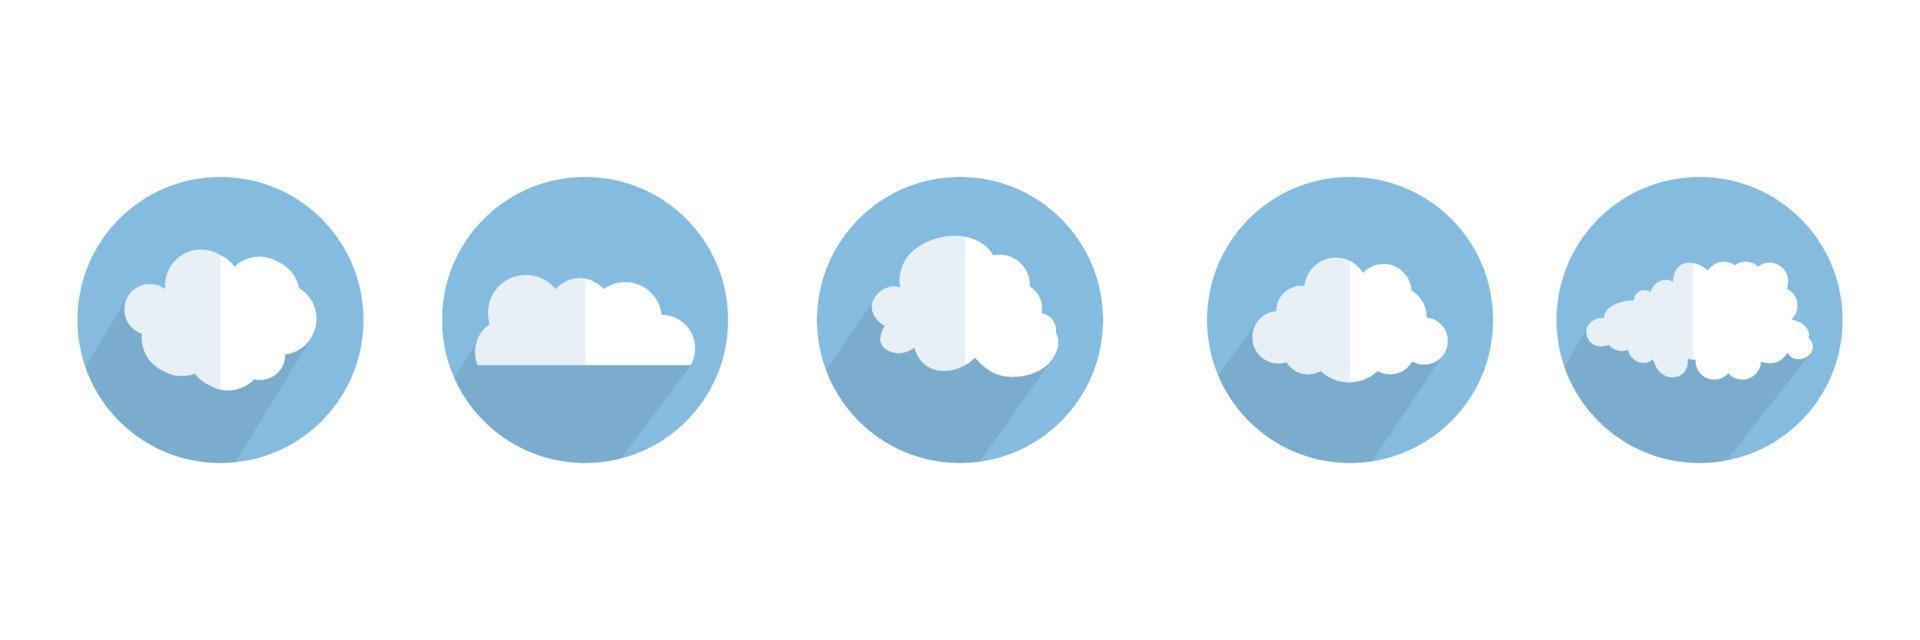 Clouds icon set. Cloud icons for cloud computing web and app. Vector design.